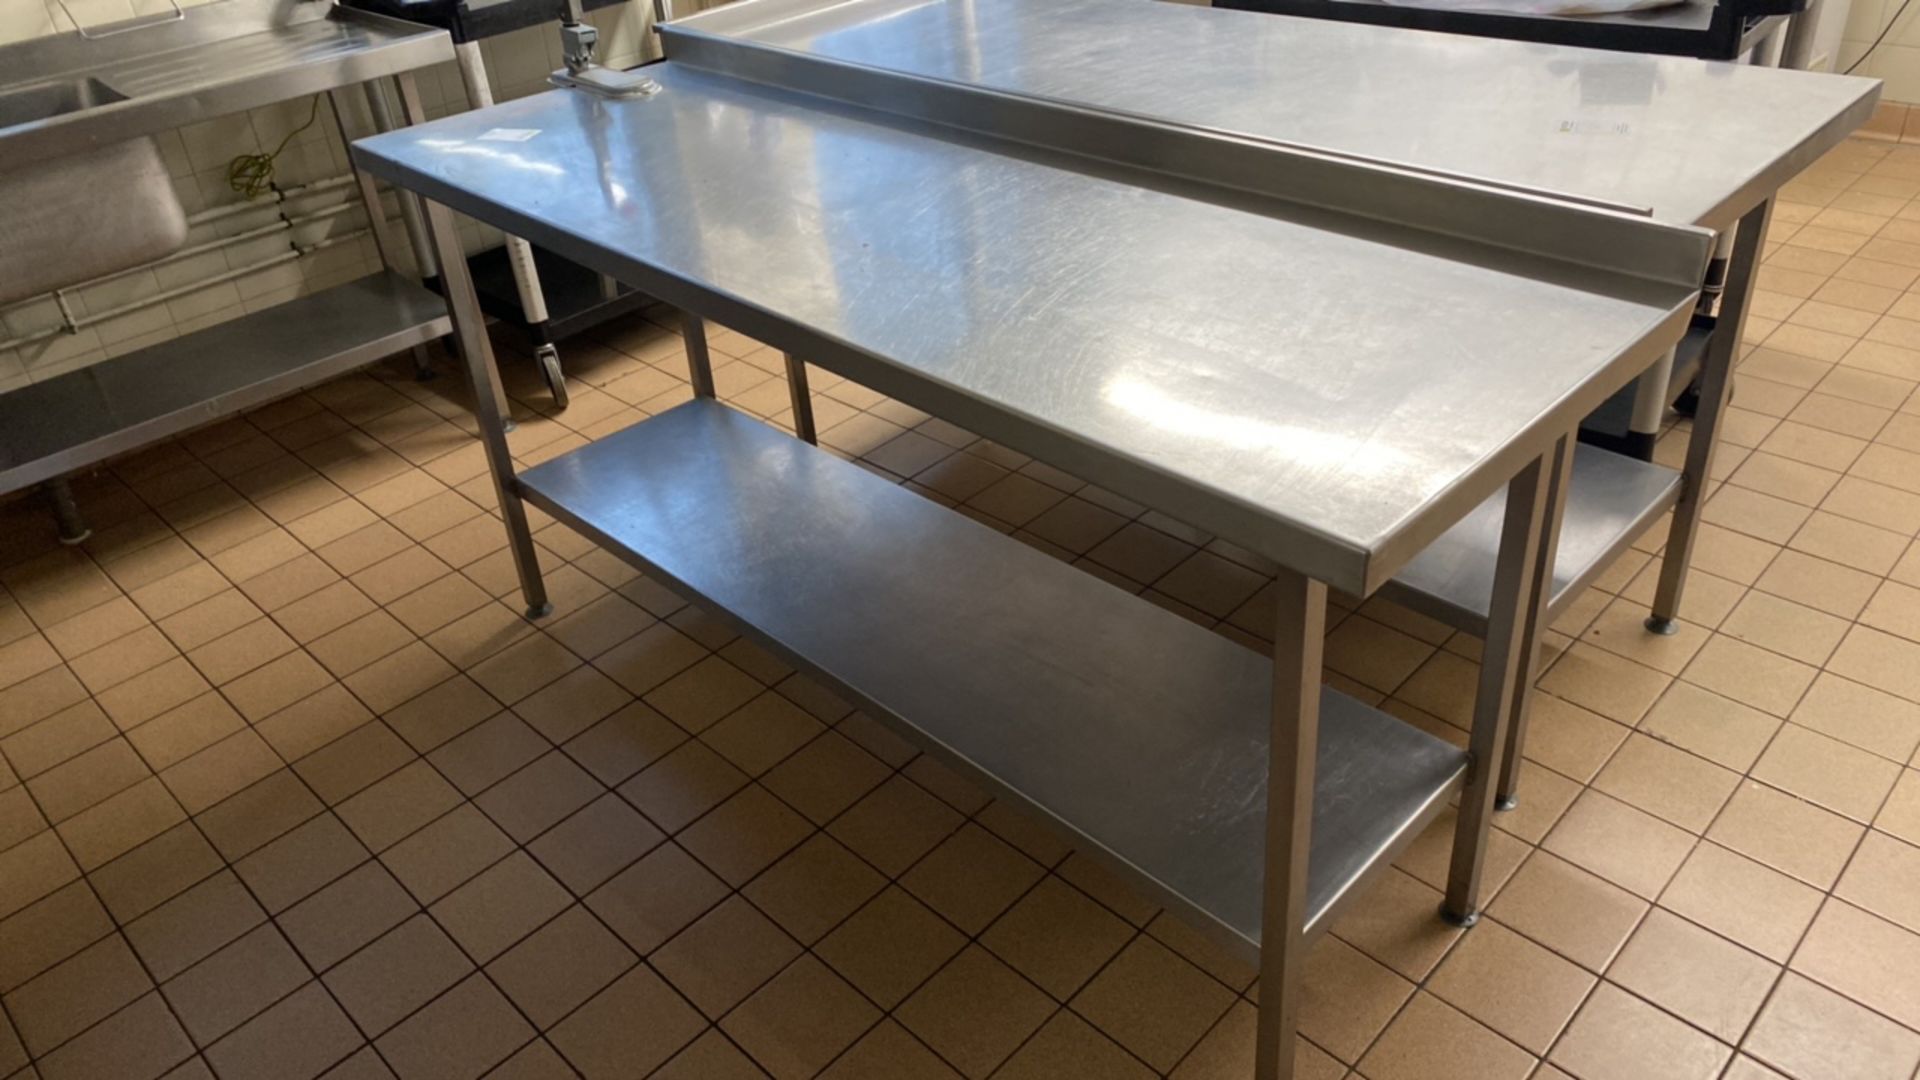 Stainless Steel Preparation Station - Image 2 of 3